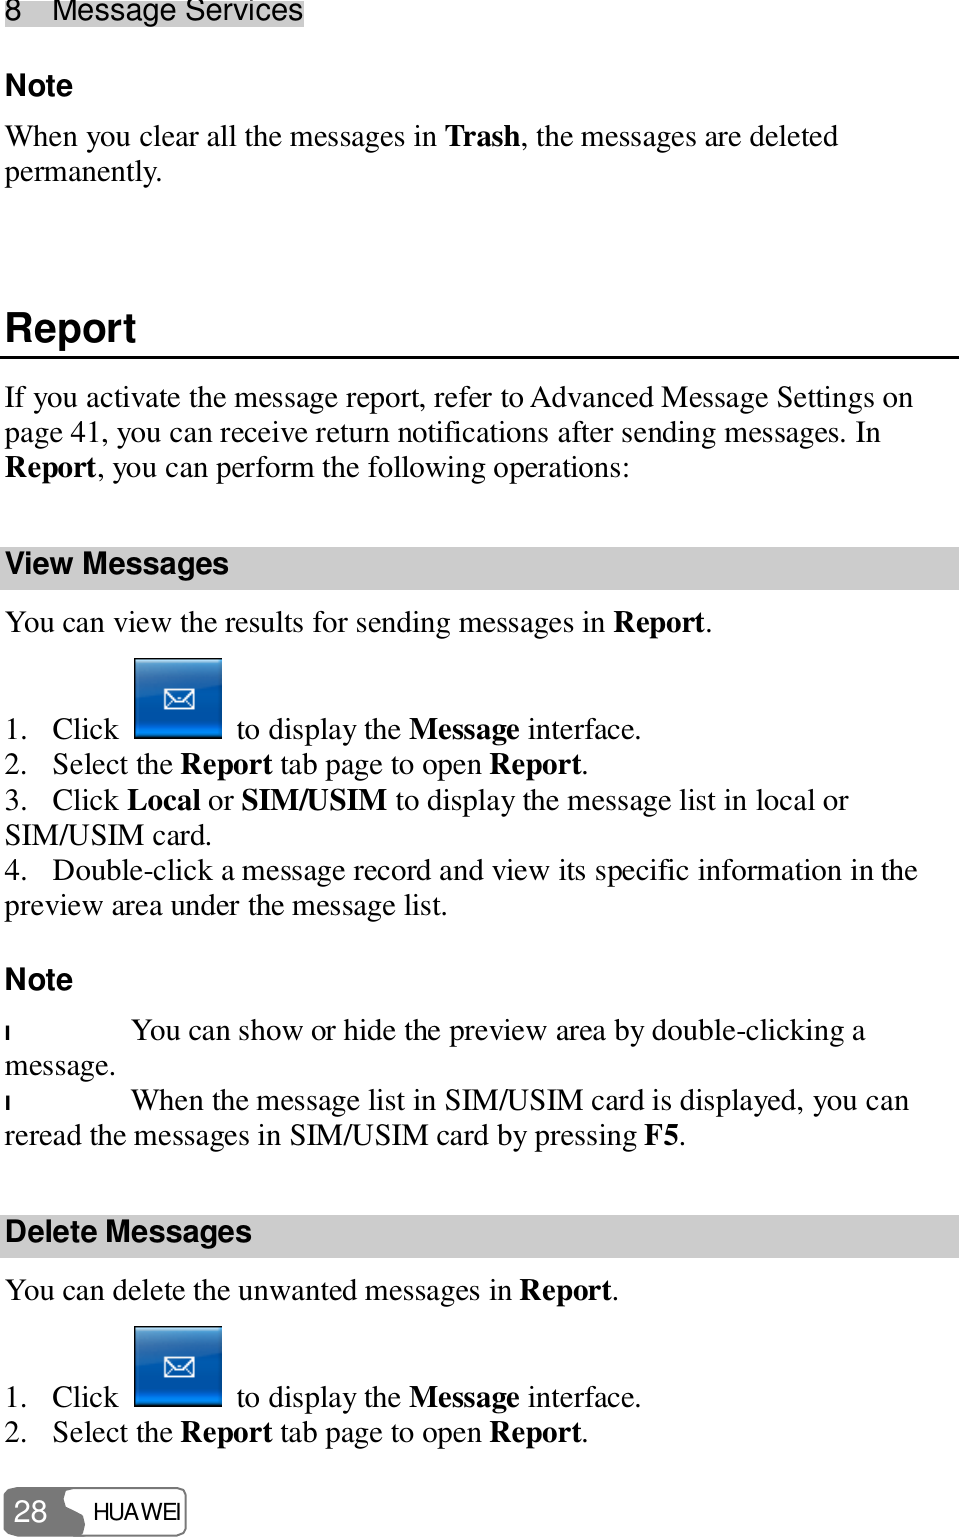 8  Message Services HUAWEI  28 Note  When you clear all the messages in Trash, the messages are deleted permanently.  Report If you activate the message report, refer to Advanced Message Settings on page 41, you can receive return notifications after sending messages. In Report, you can perform the following operations: View Messages You can view the results for sending messages in Report. 1. Click   to display the Message interface. 2. Select the Report tab page to open Report. 3. Click Local or SIM/USIM to display the message list in local or SIM/USIM card. 4. Double-click a message record and view its specific information in the preview area under the message list. Note  l You can show or hide the preview area by double-clicking a message. l When the message list in SIM/USIM card is displayed, you can reread the messages in SIM/USIM card by pressing F5. Delete Messages You can delete the unwanted messages in Report. 1. Click   to display the Message interface. 2. Select the Report tab page to open Report. 